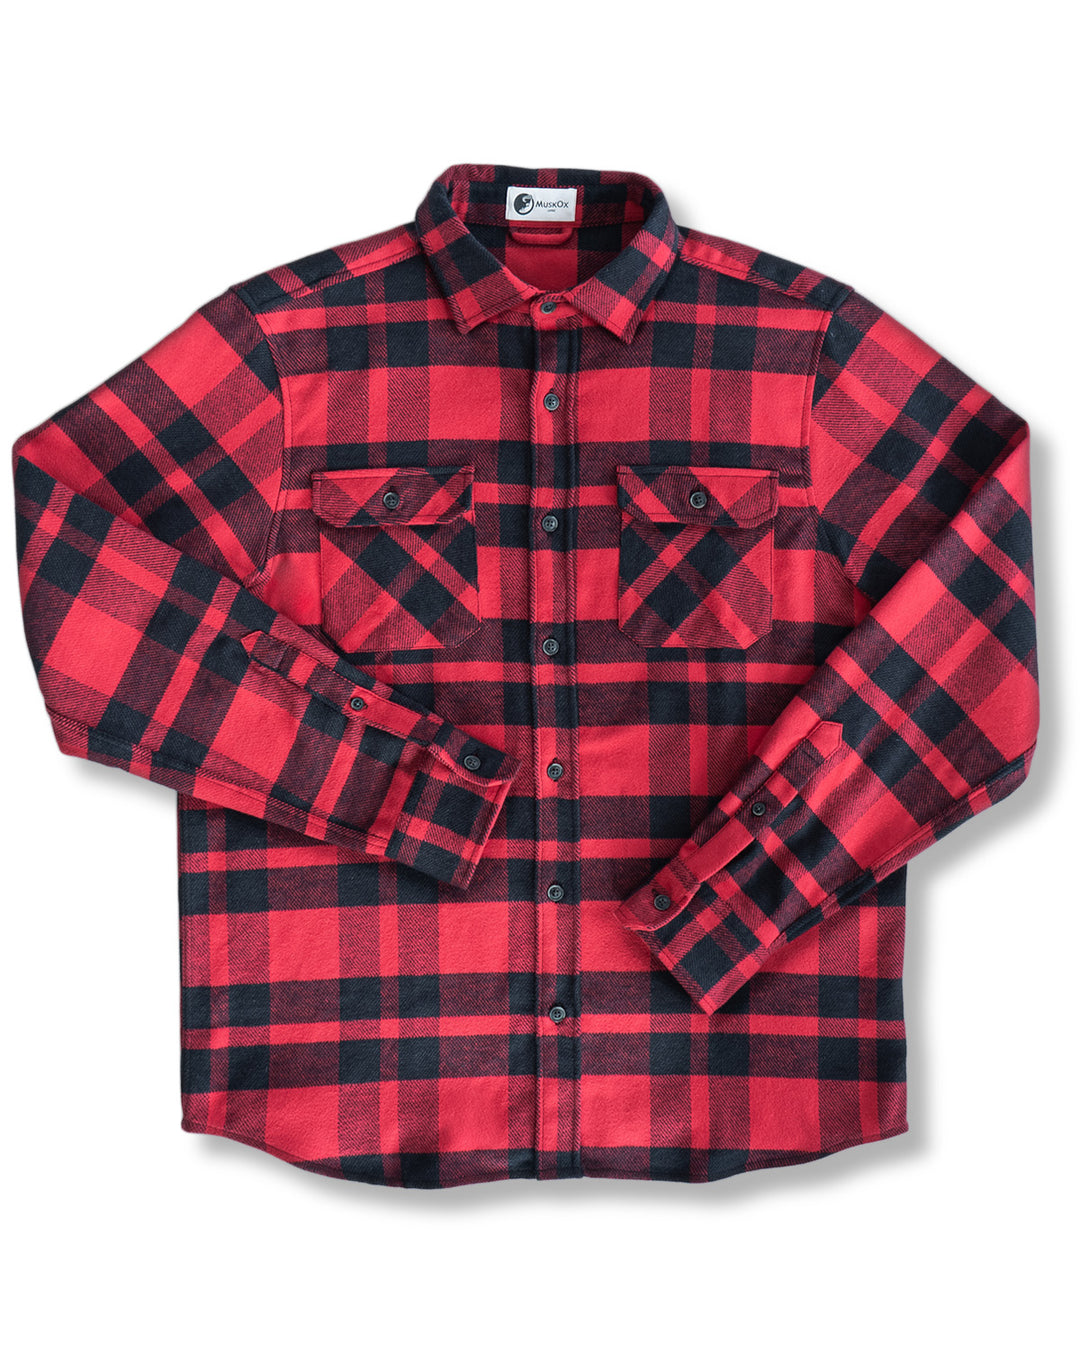 Men's L.A Logo Flannel Shirt Black Checkered Light Weight with